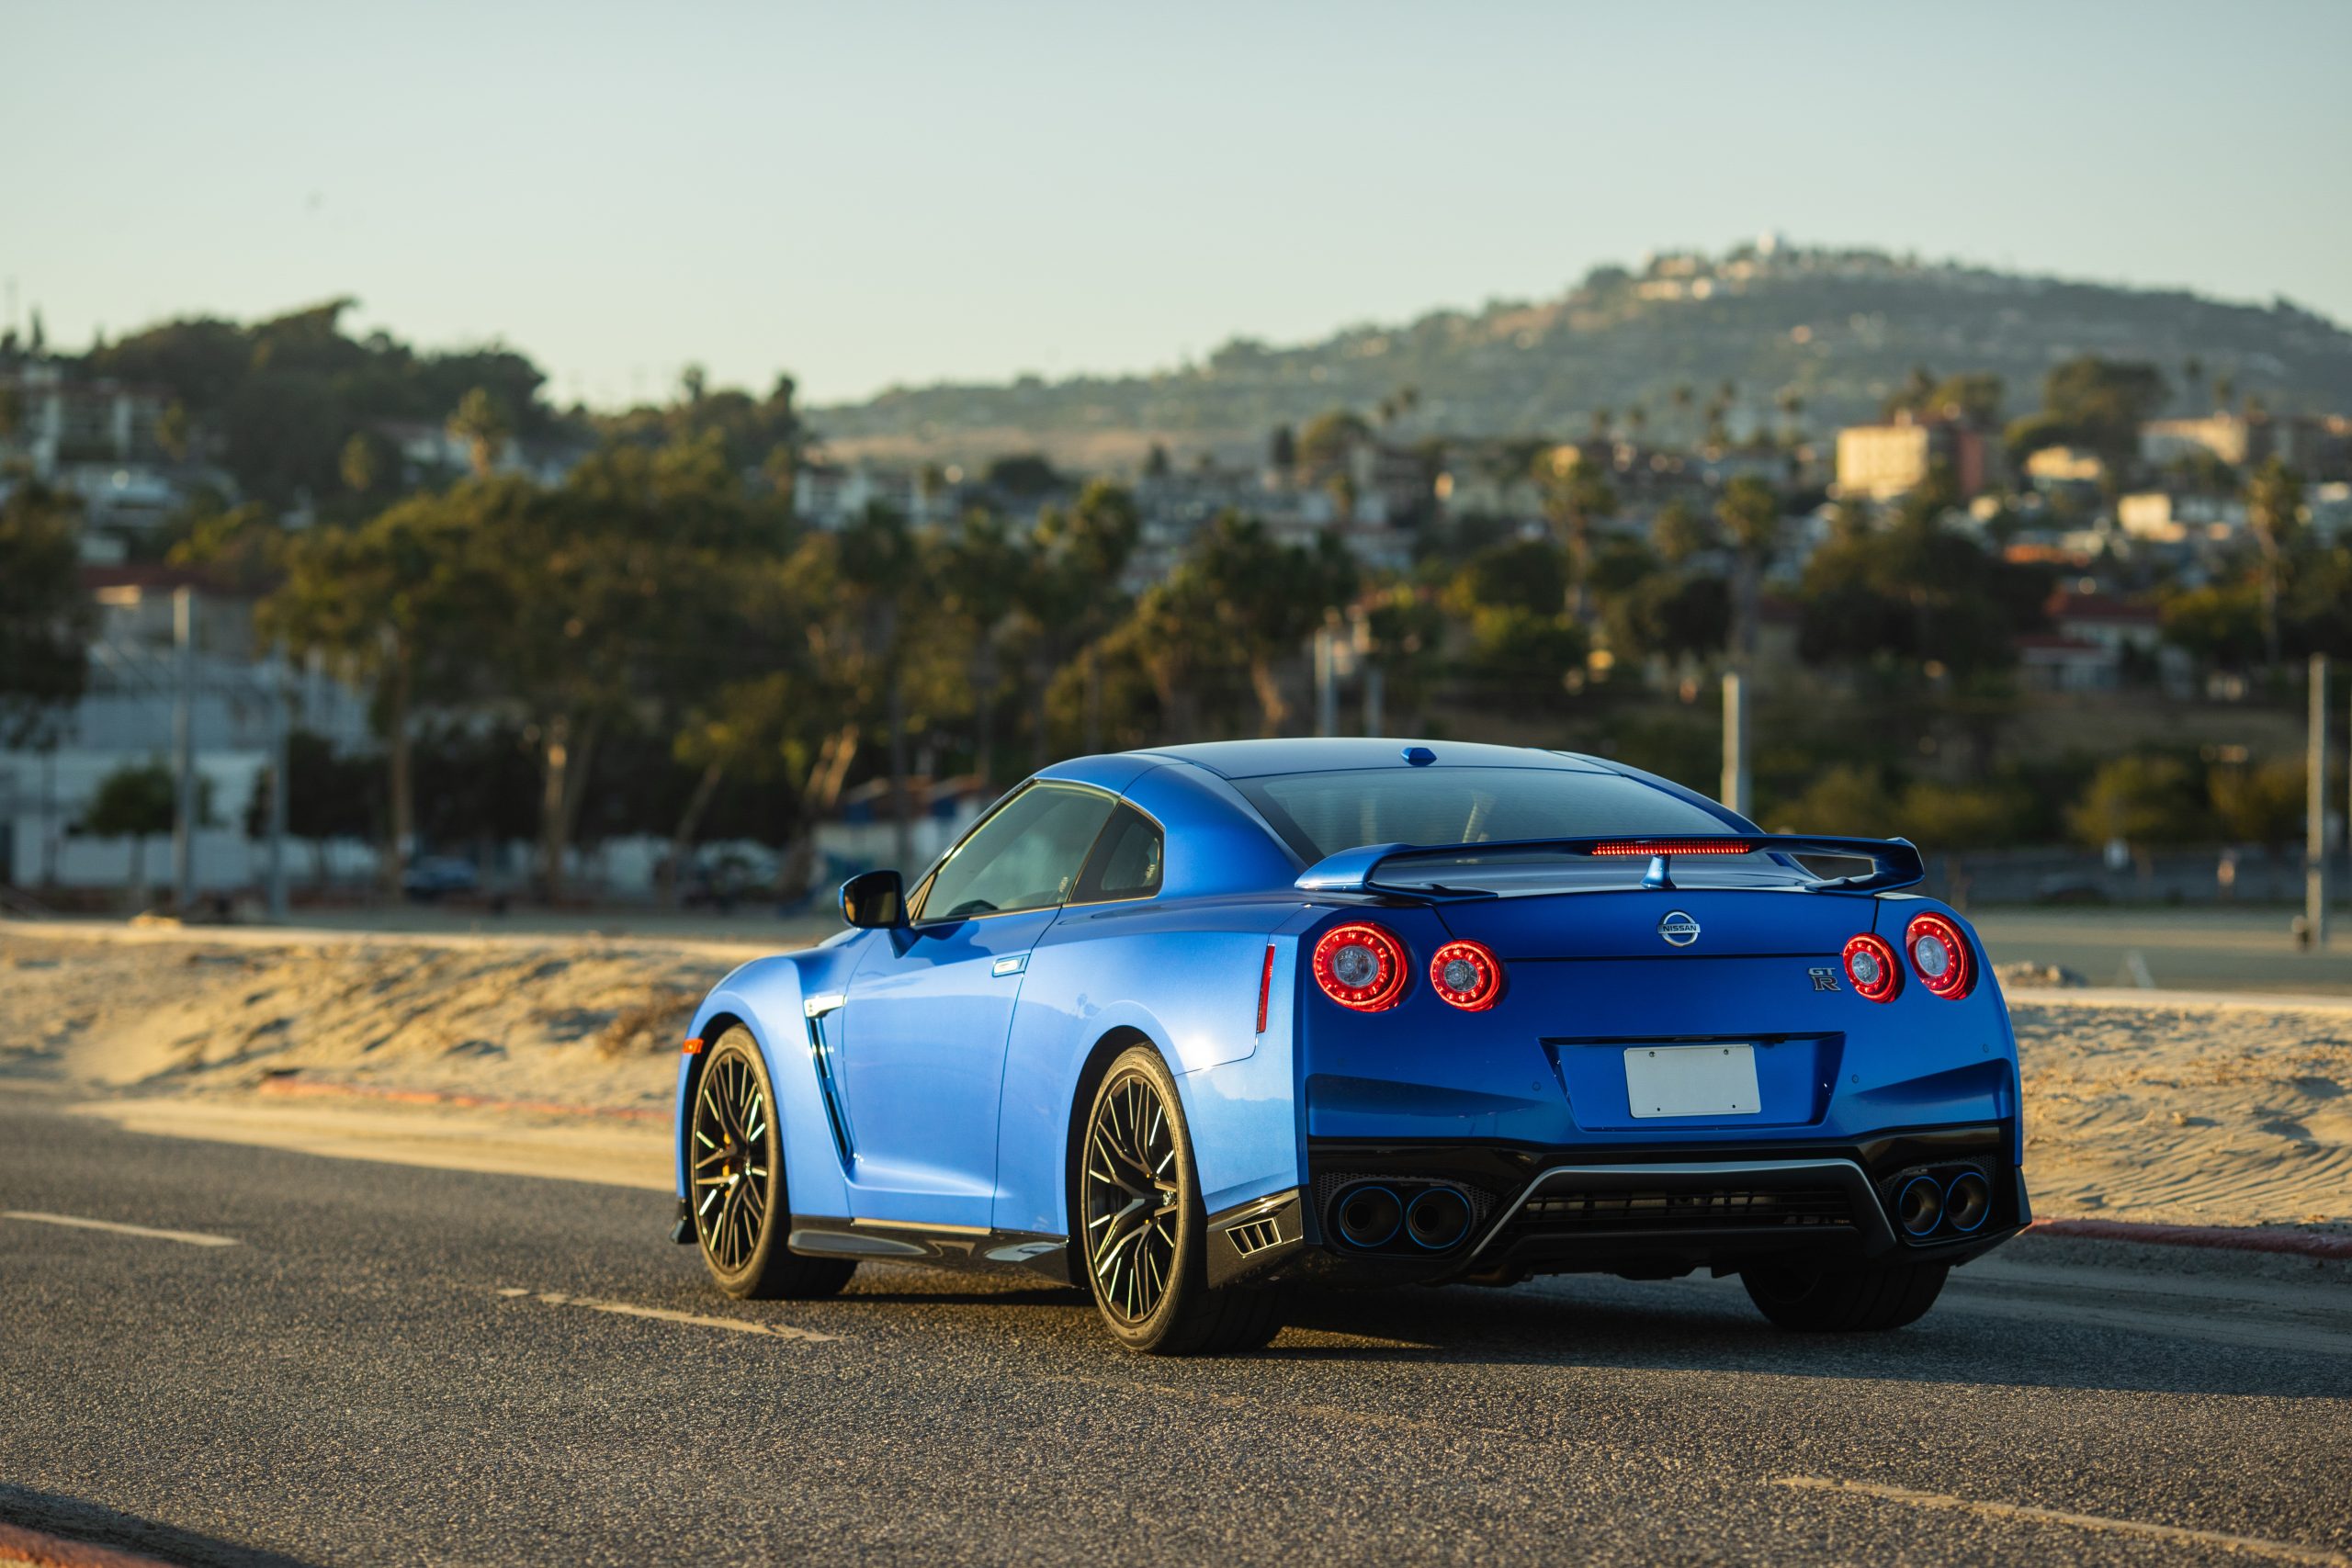 2020 Nissan GT-R Will Have Hypercar Performance,Expert Predicts